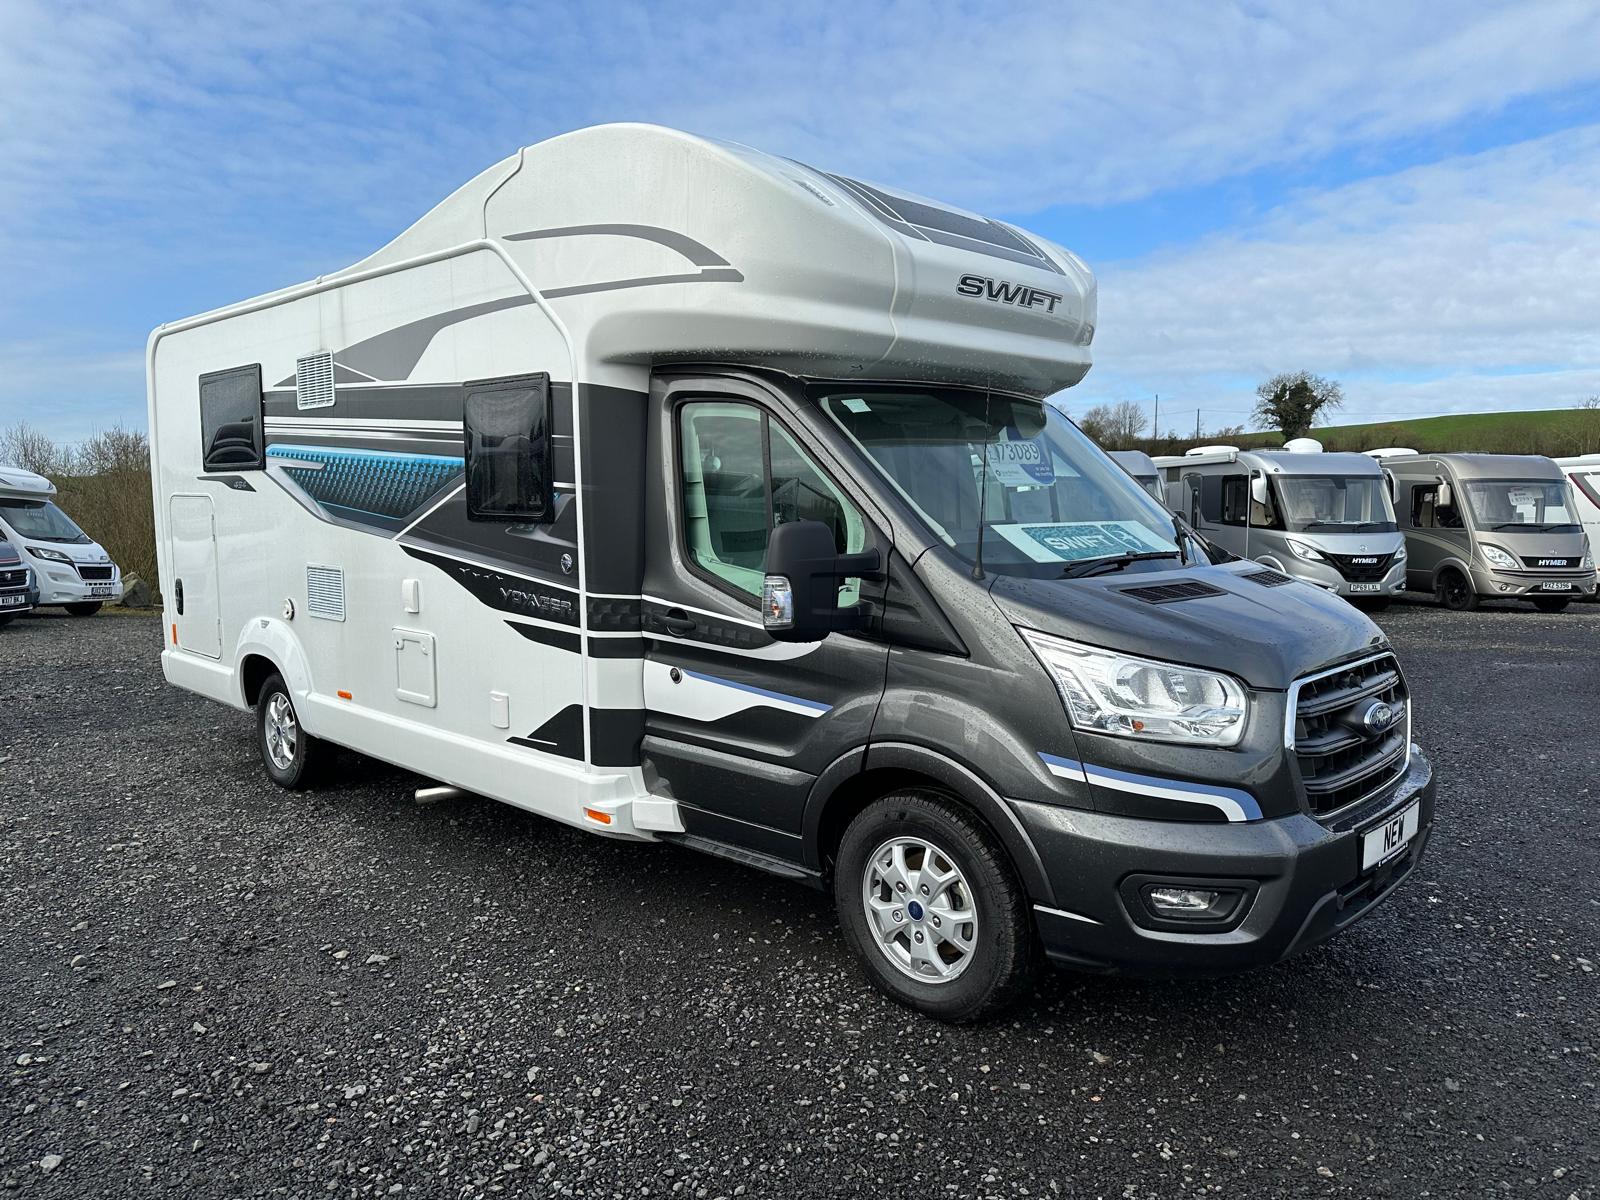 NEW Swift Voyager 494 - Automatic